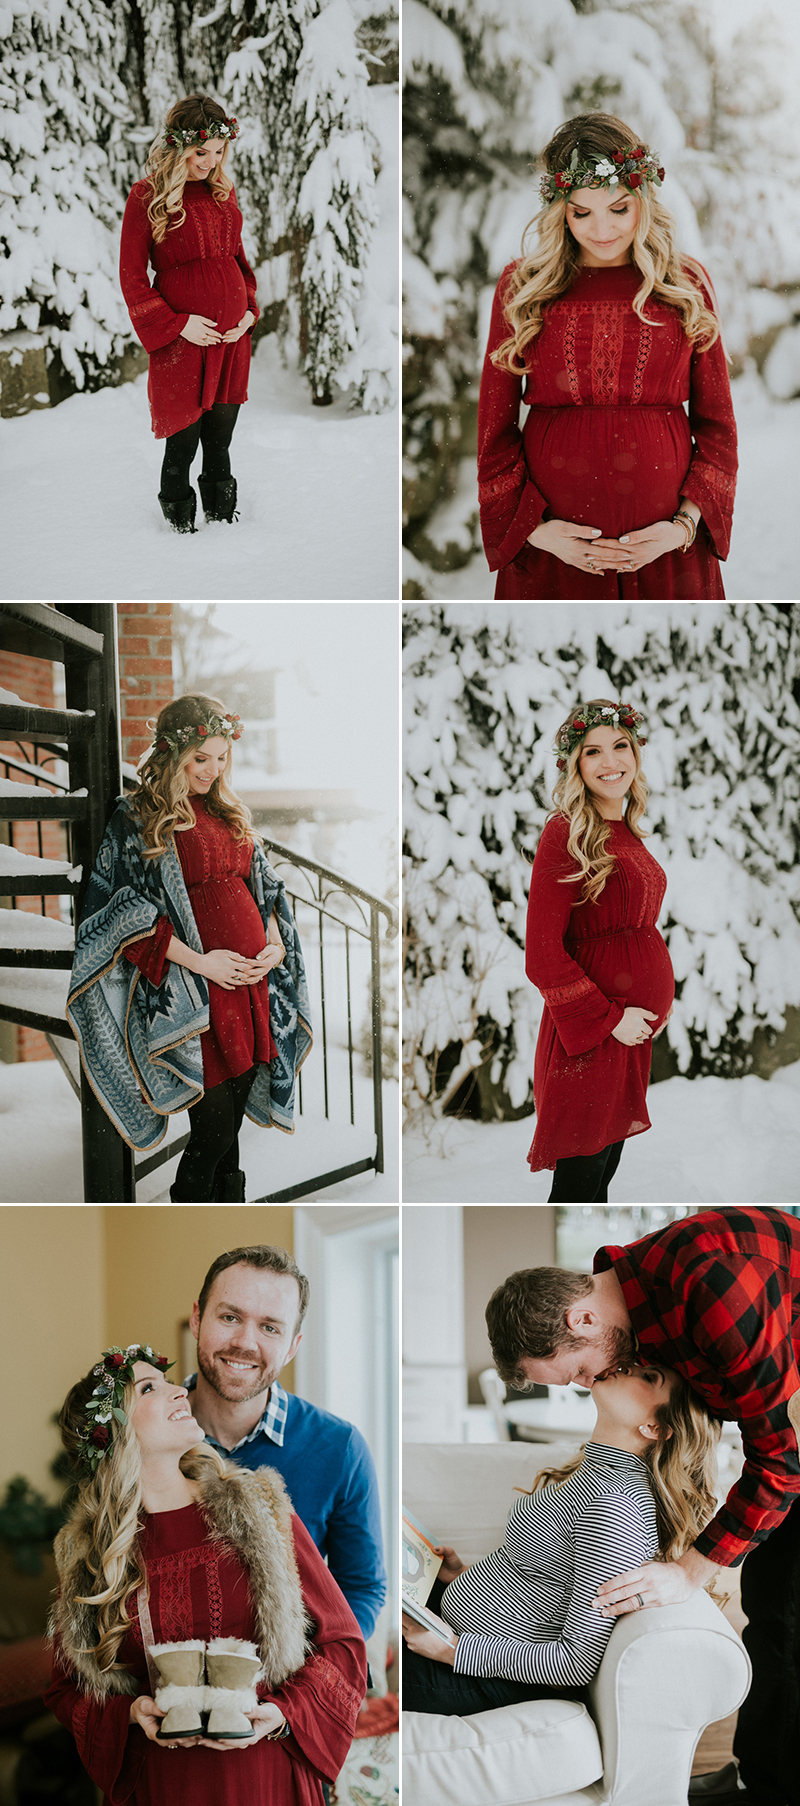 Pin by Abby Ciot on Photos | Winter portraits photography, Snow photoshoot, Winter  photoshoot